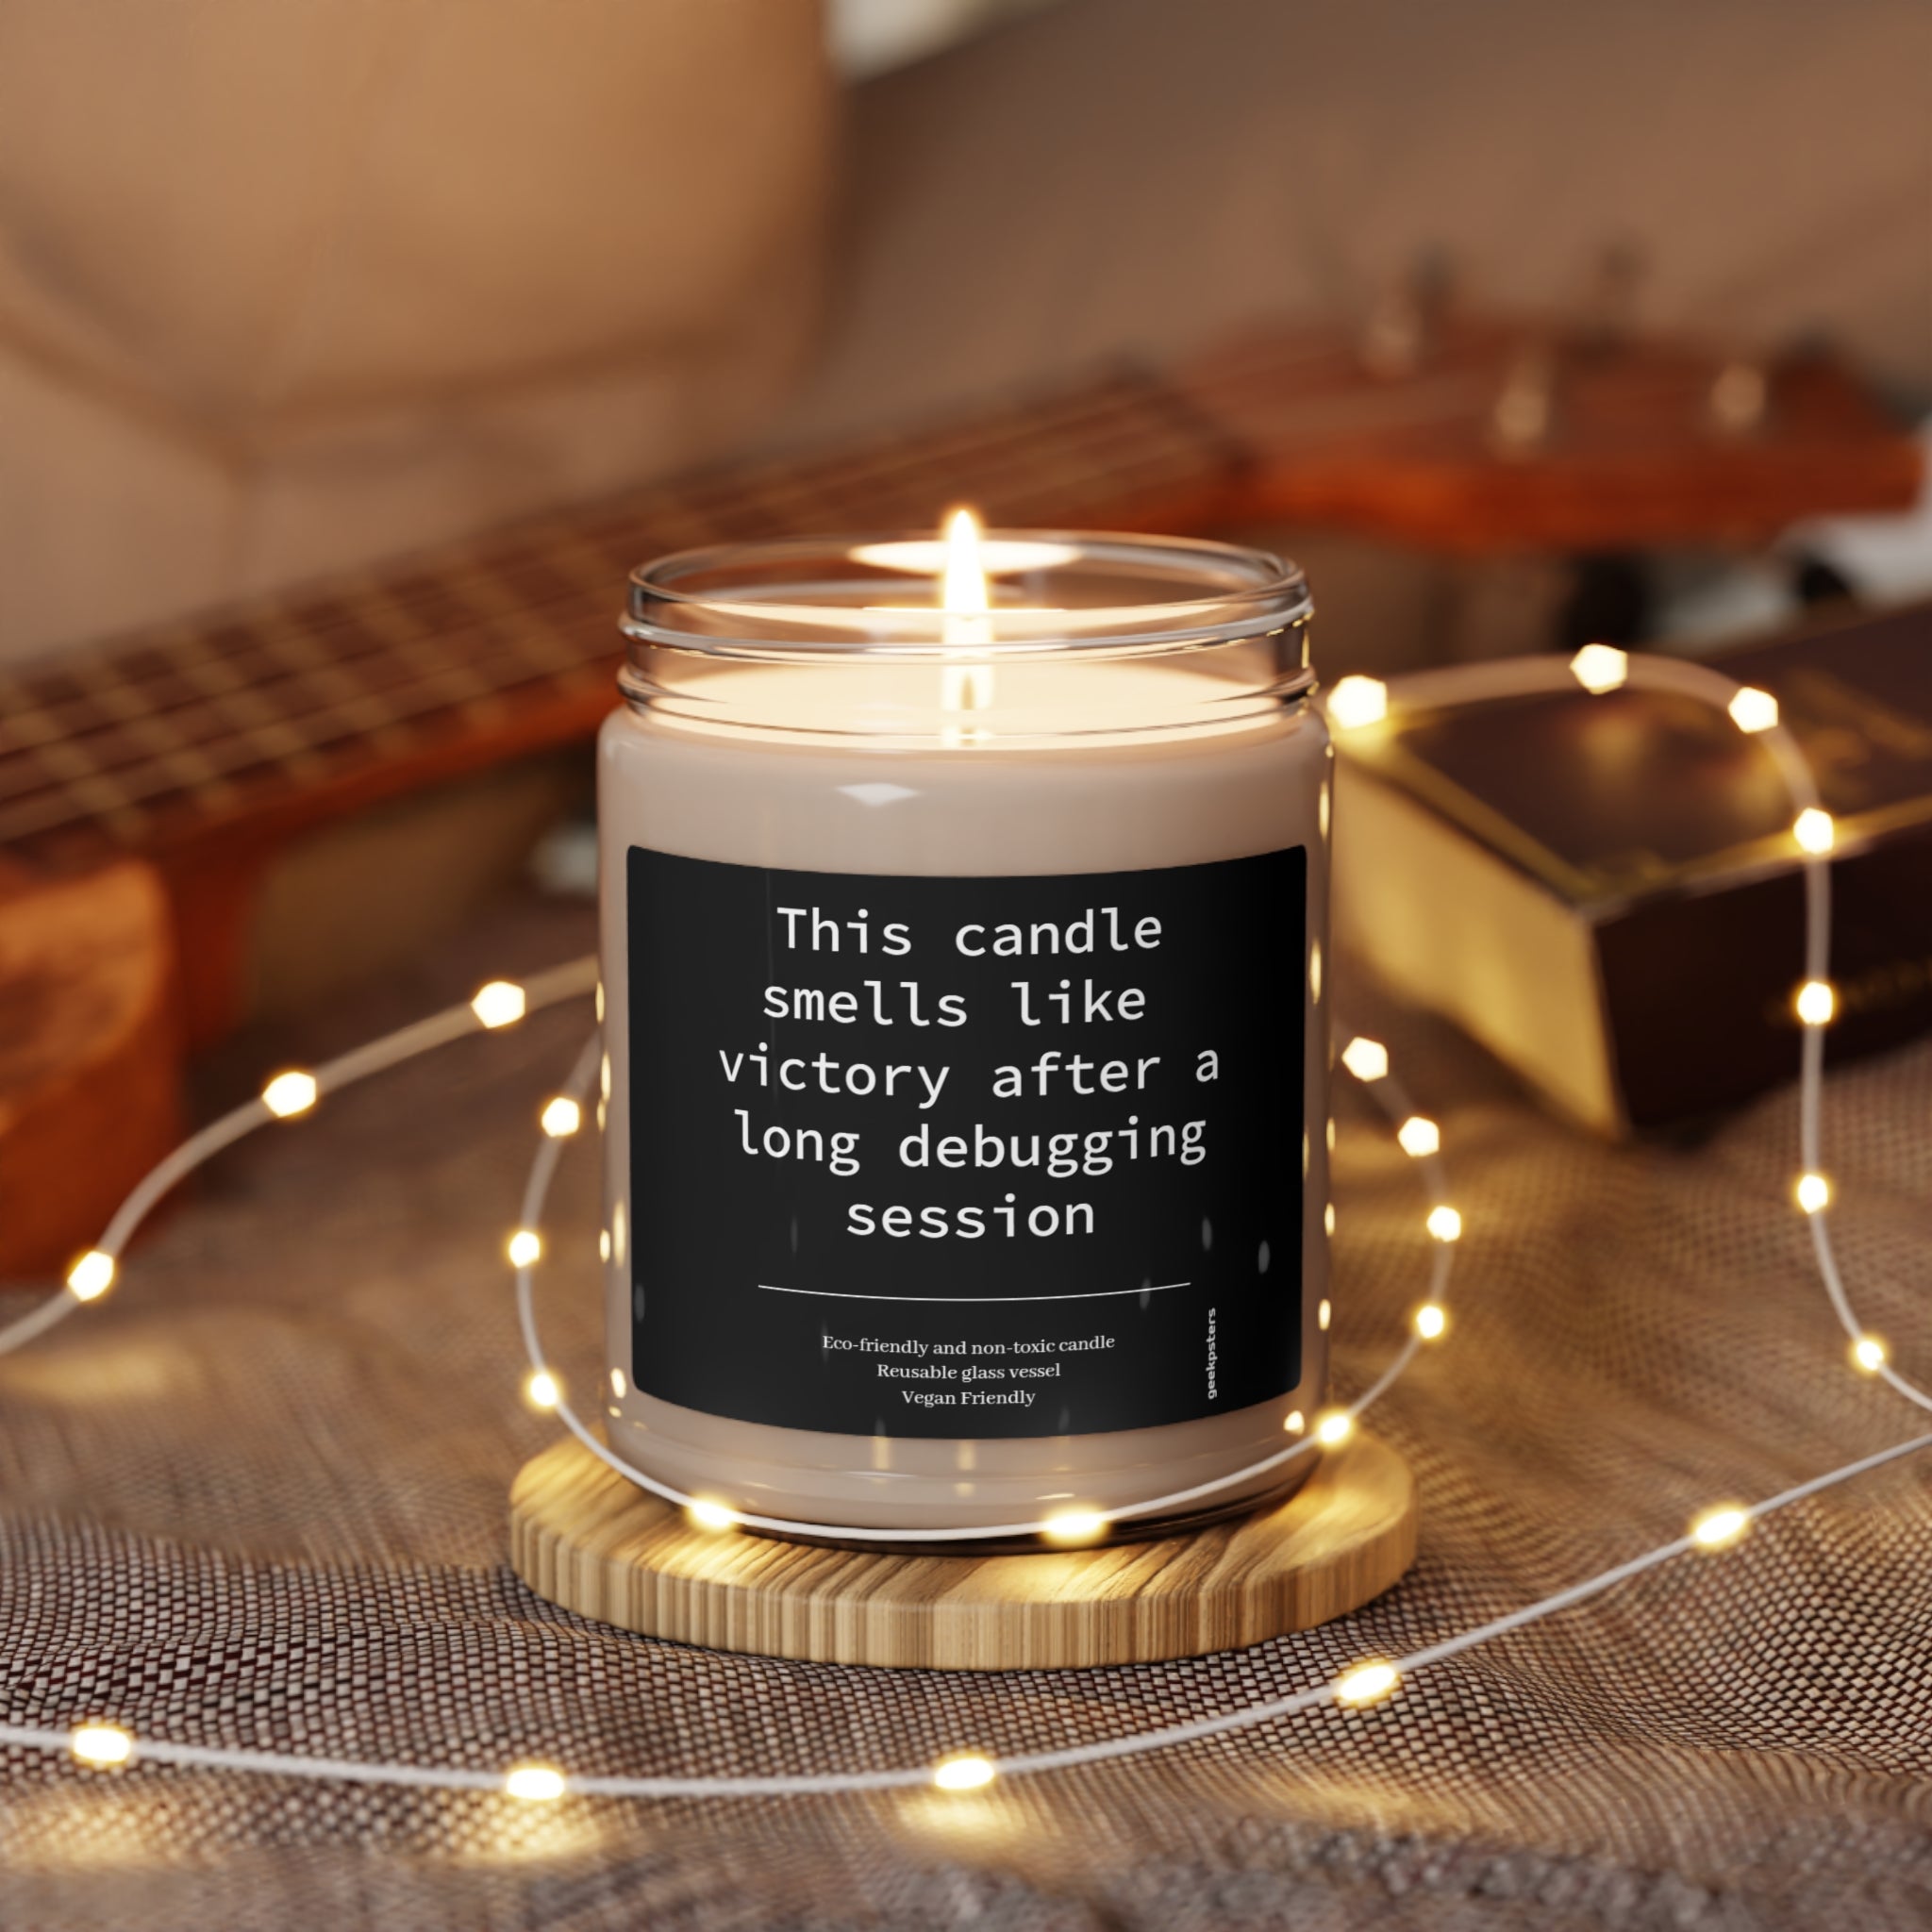 A lit This Candle Smells Like Victory After a Long Debugging Session - Scented Soy Candle, 9oz with a label reading "this candle smells like victory after a long debugging session" on a wooden holder, surrounded by small lights.